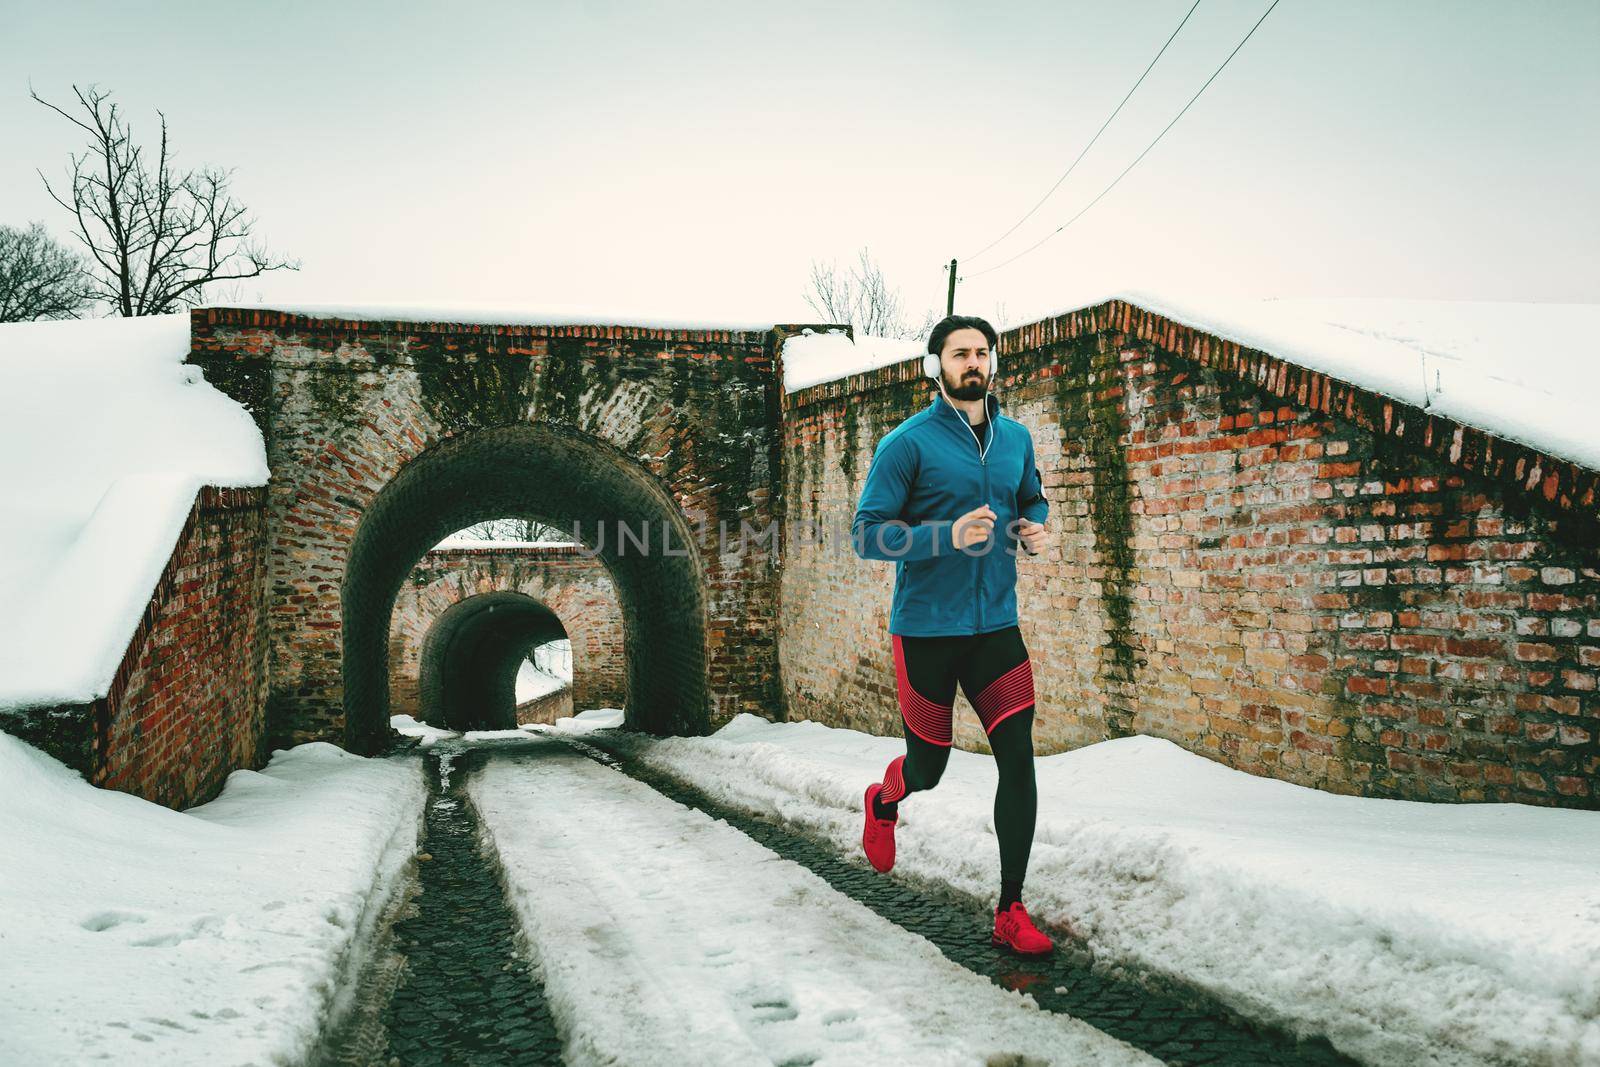 A male runner with headphones on his ears running in the public place during the winter training outside in. Copy space.